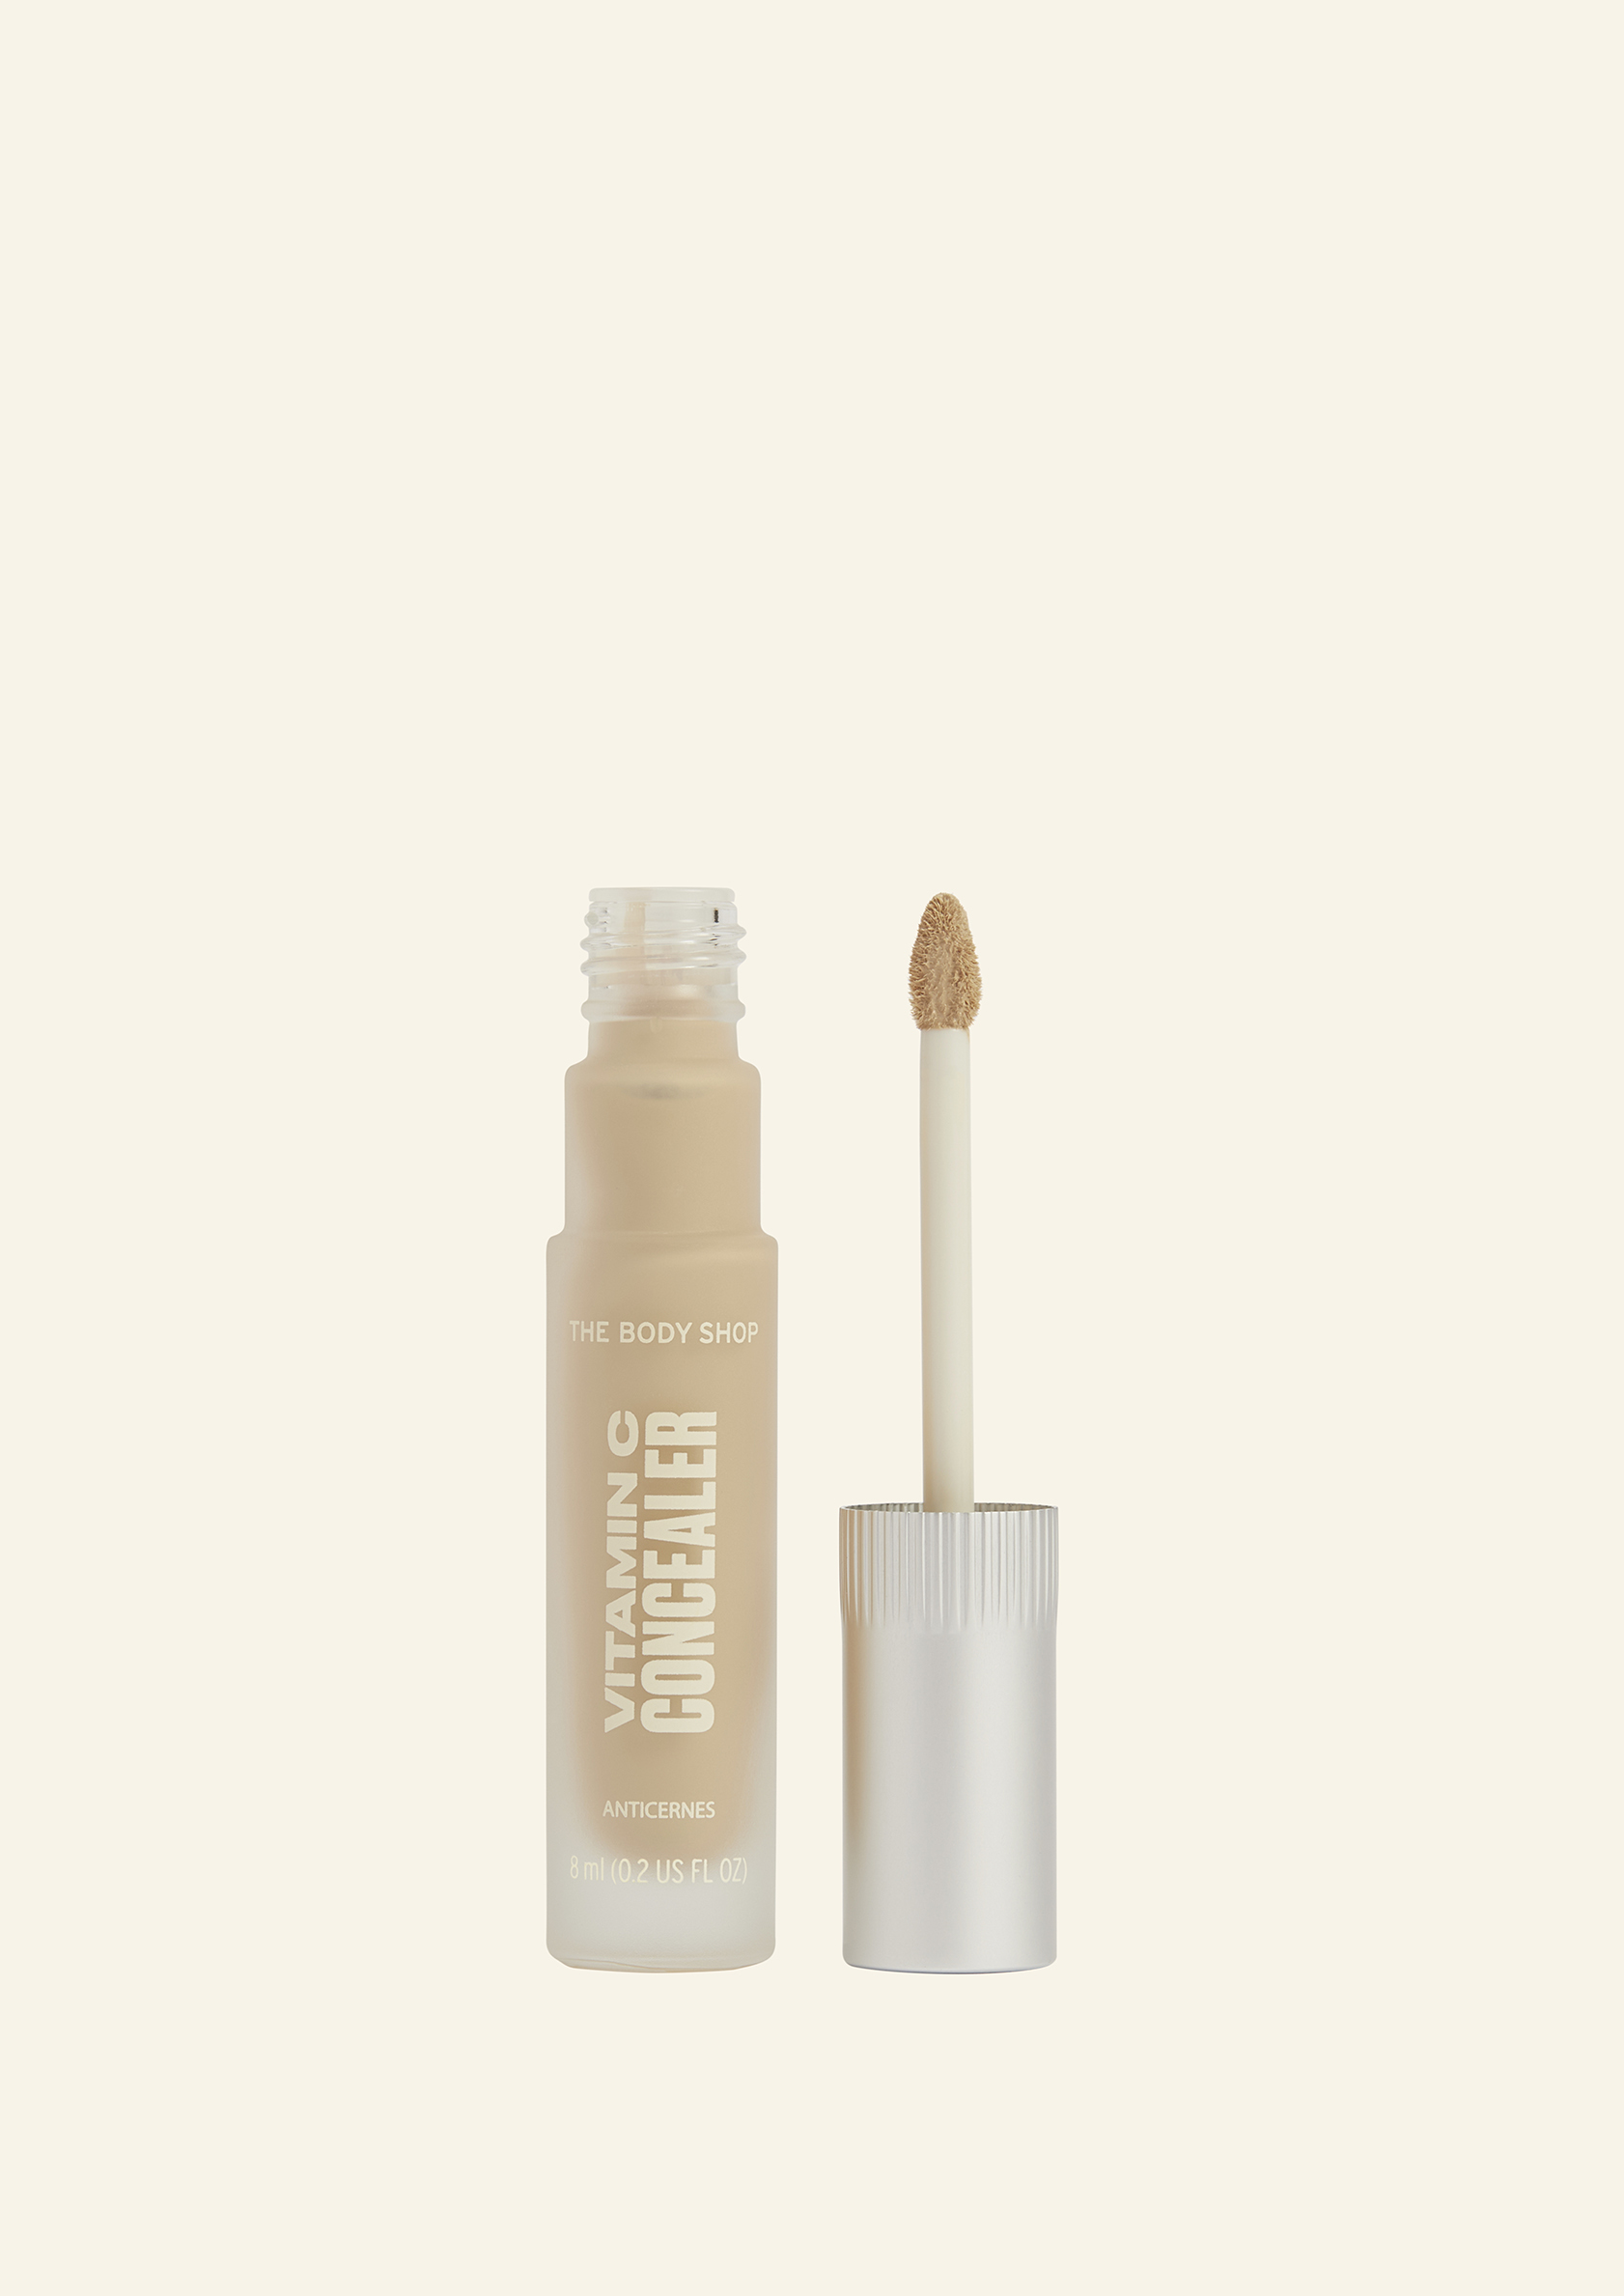 1015239 CONCEALER VITAMIN C LIGHT 1 W 8 ML A0 X BRONZE NW brush INABUPS820